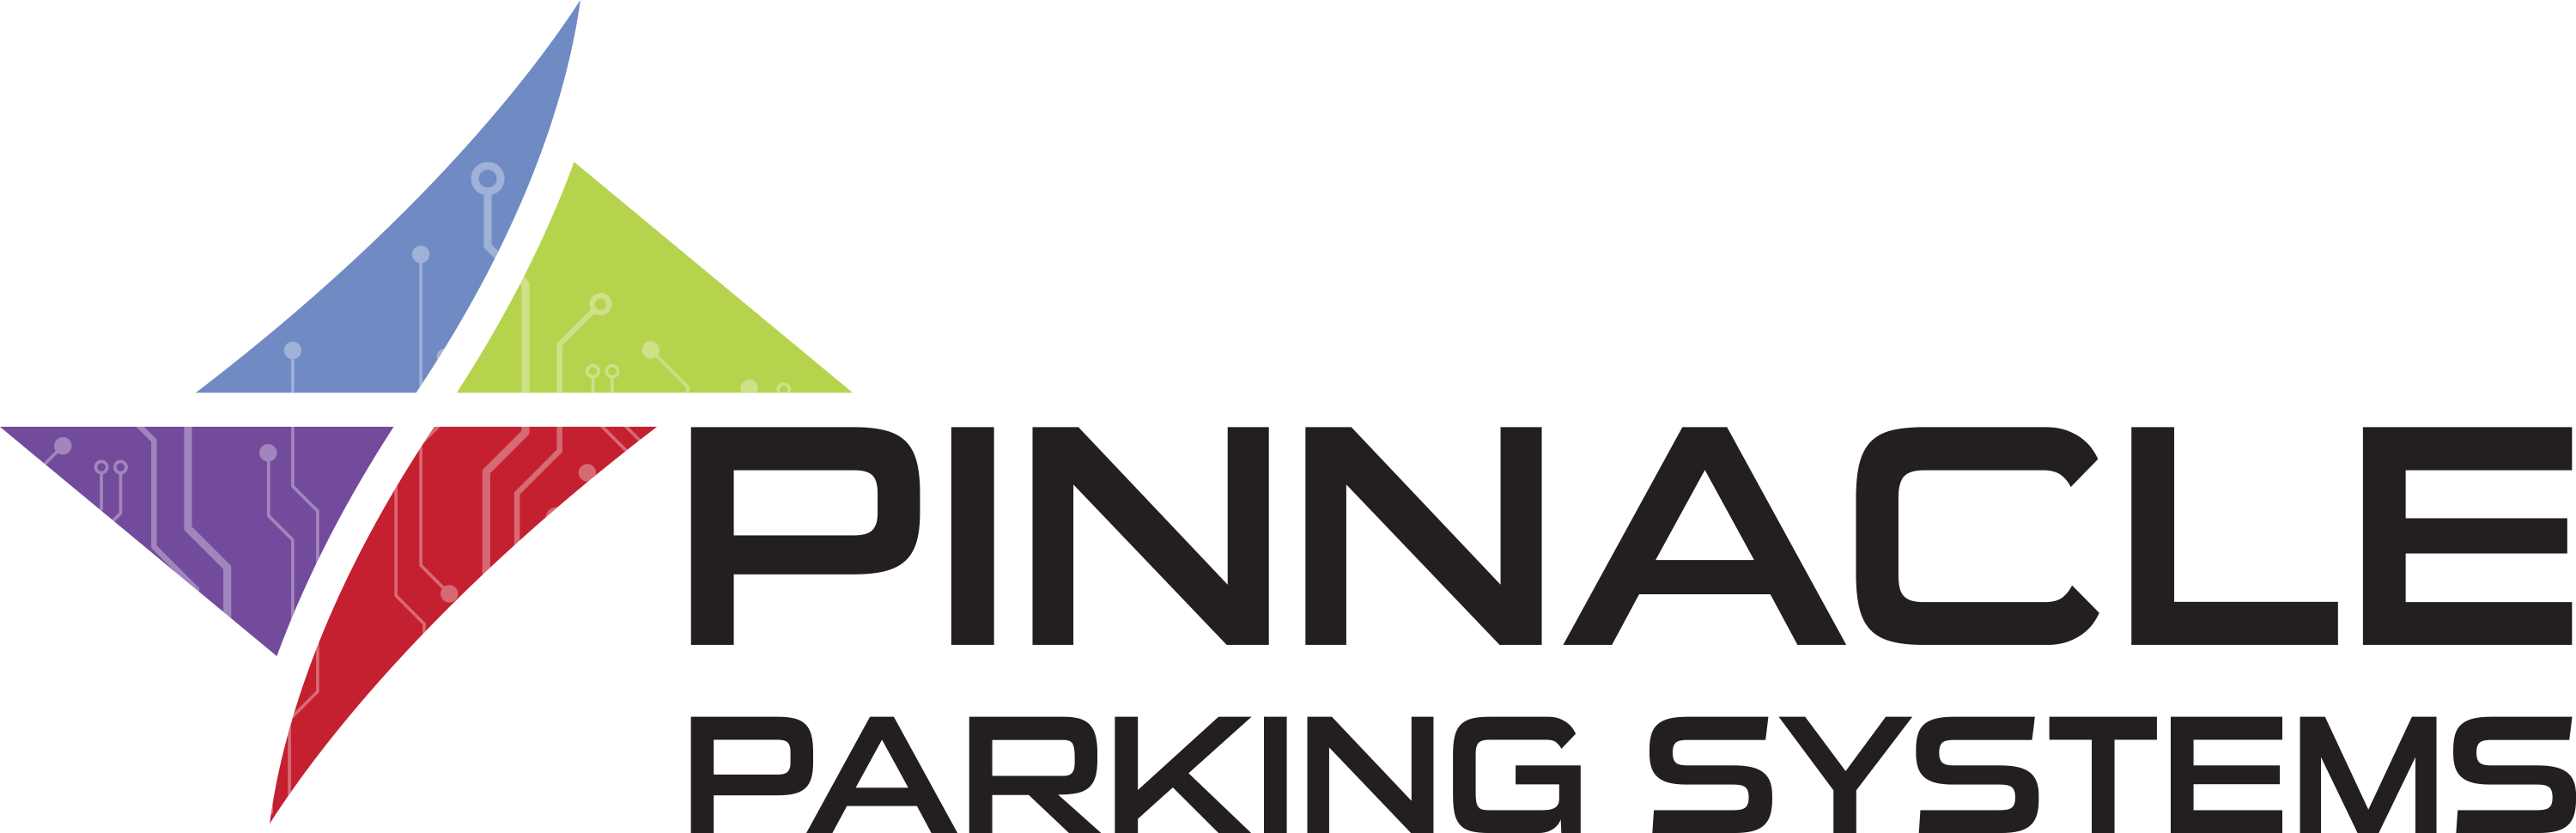 Pinnacle Parking Systems